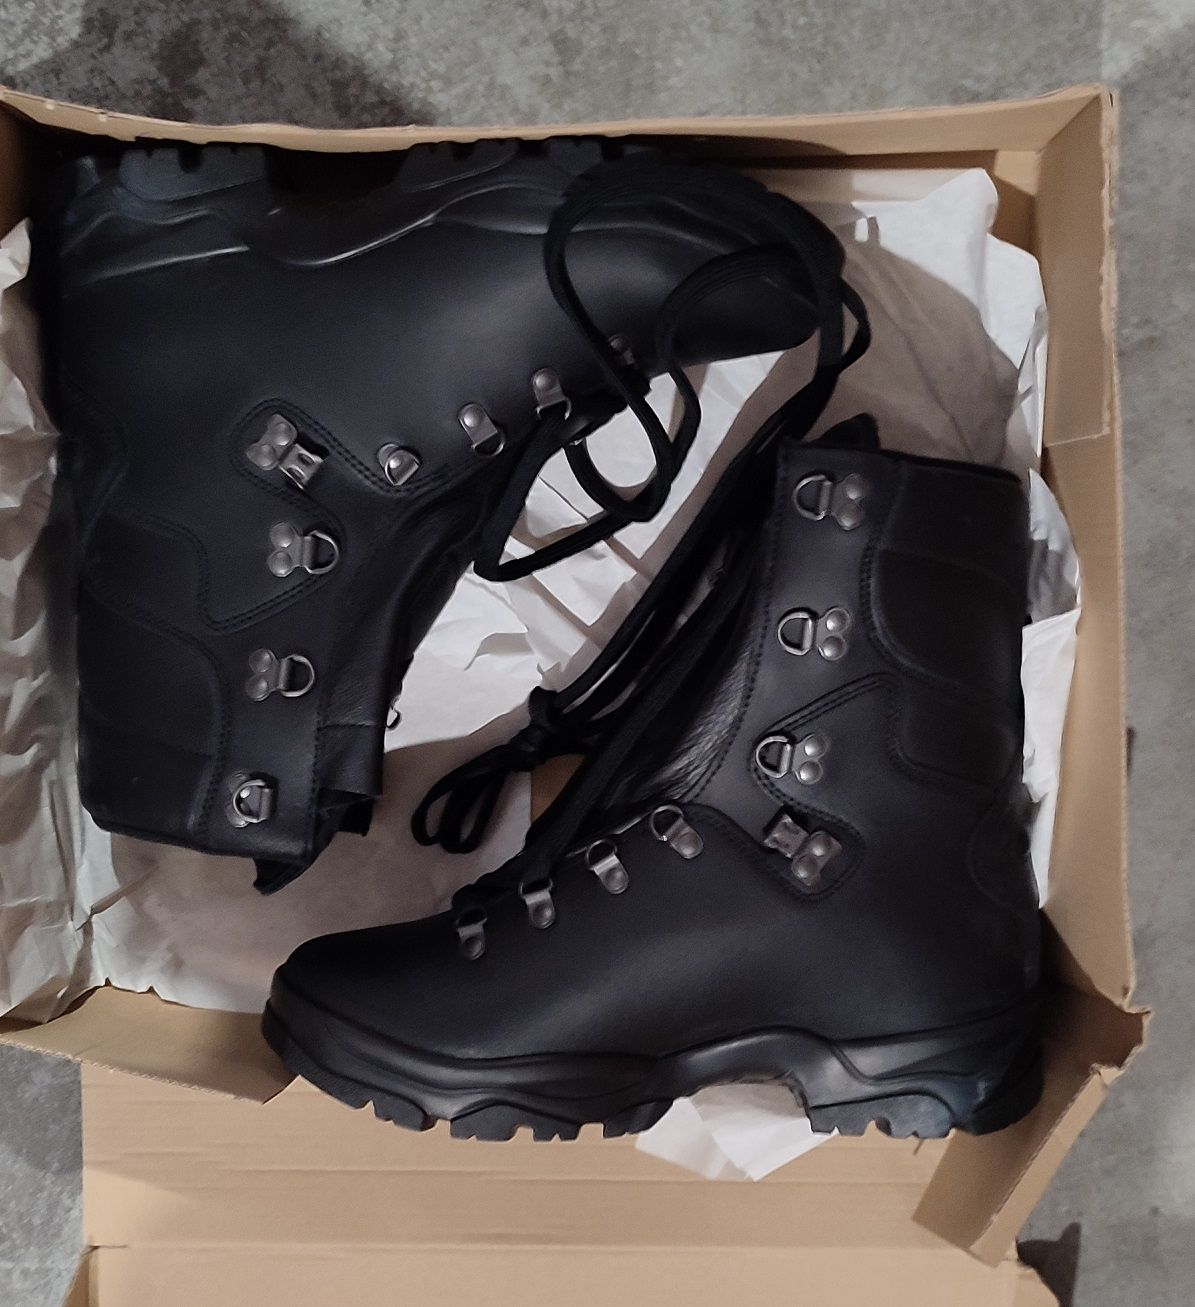 Null 7541 pairs of combat shoes, in gore tex. New condition.

From size 35 to 51&hellip;